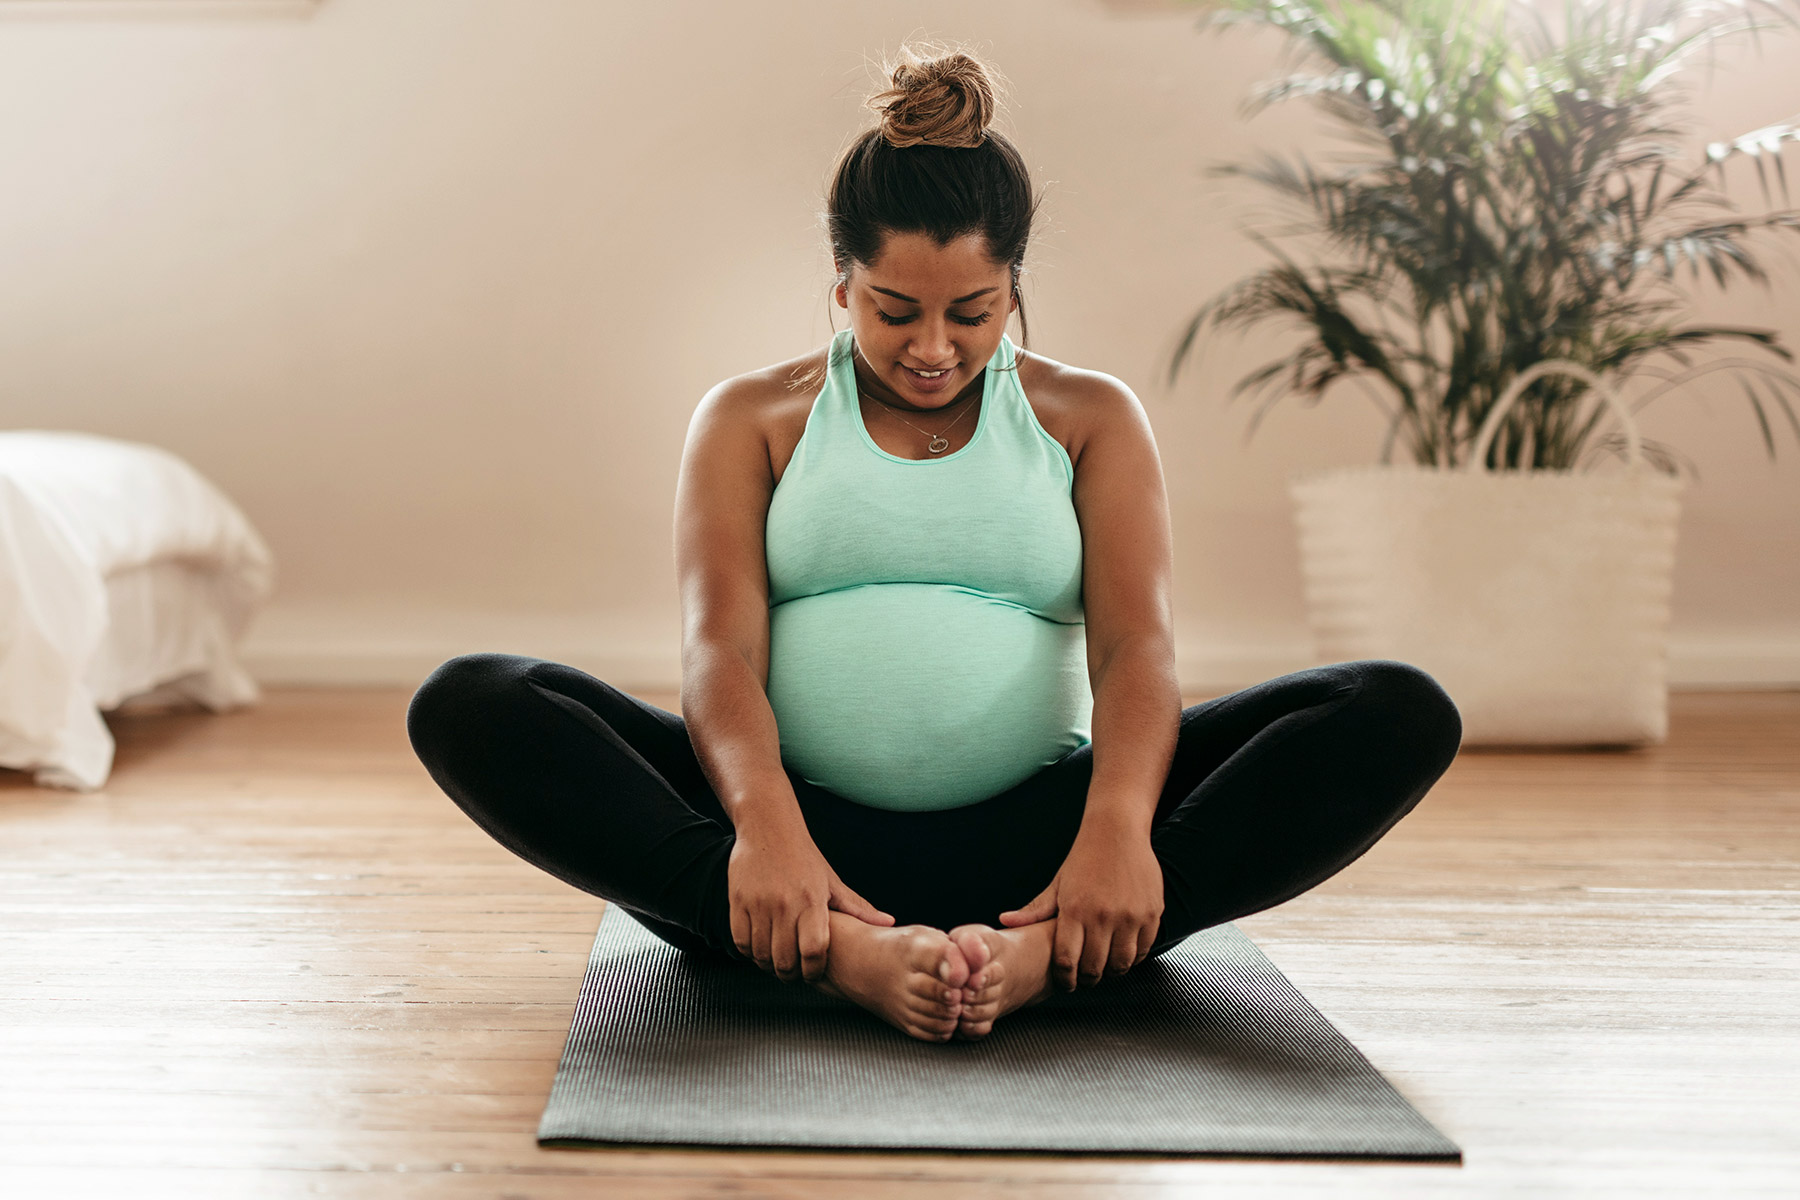 11 Things to Know About Maintaining a Healthy, Fit Pregnancy